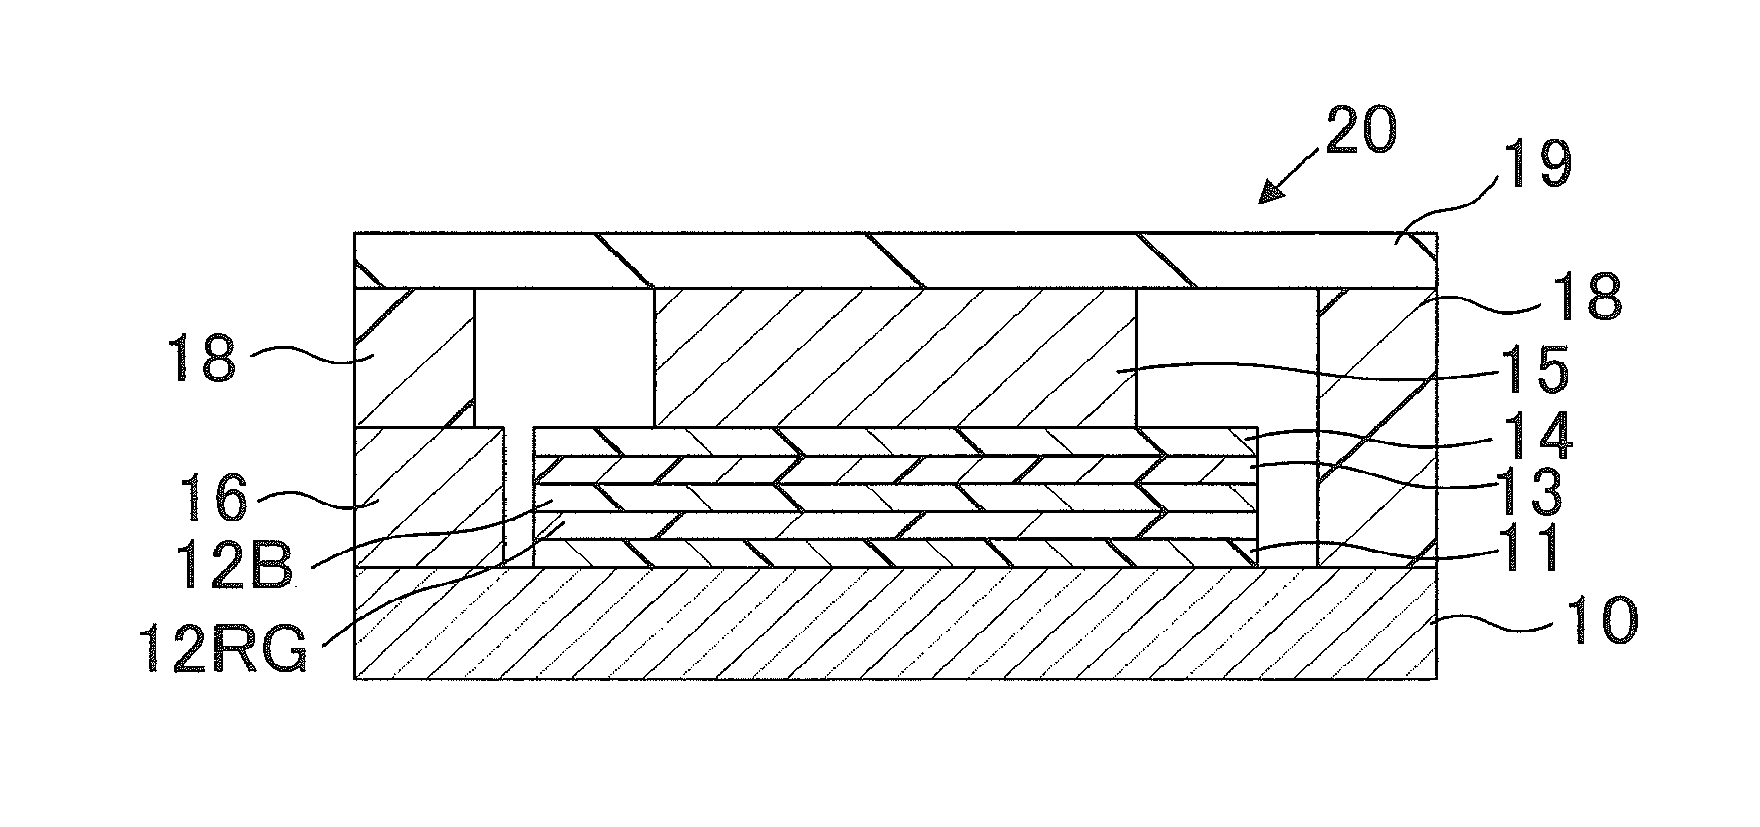 Transparent electroconductive film and organic electroluminescent device